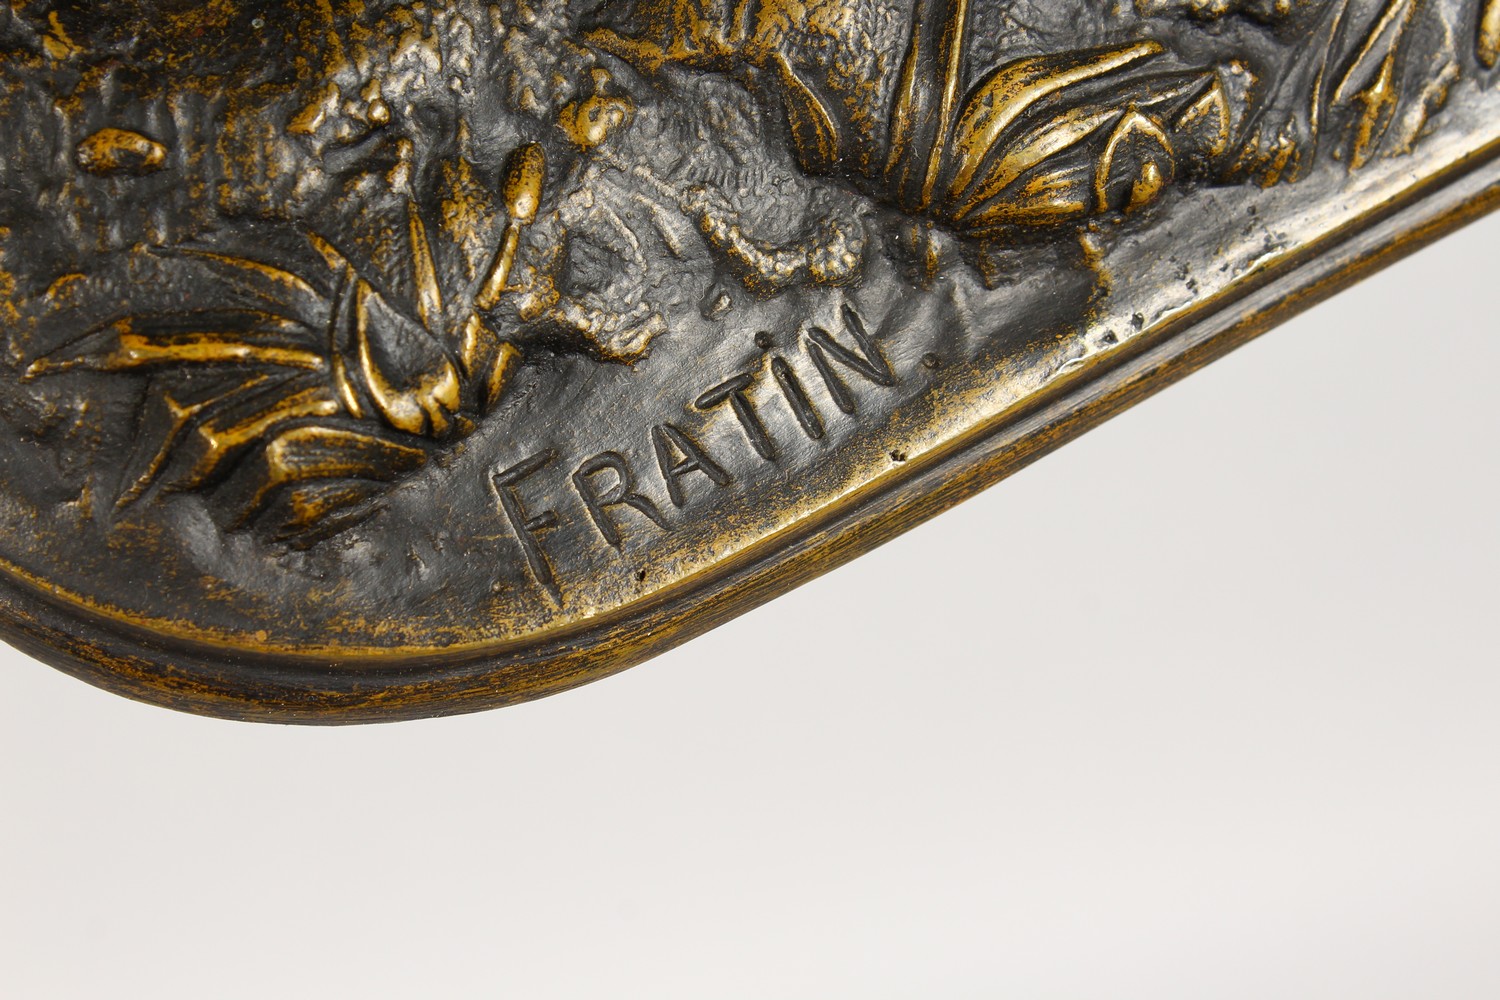 C. FRATIN (1800-1864) FRENCH A bronze mare and foal. Signed FRATIN. 10ins long x 7ins high. - Image 9 of 13